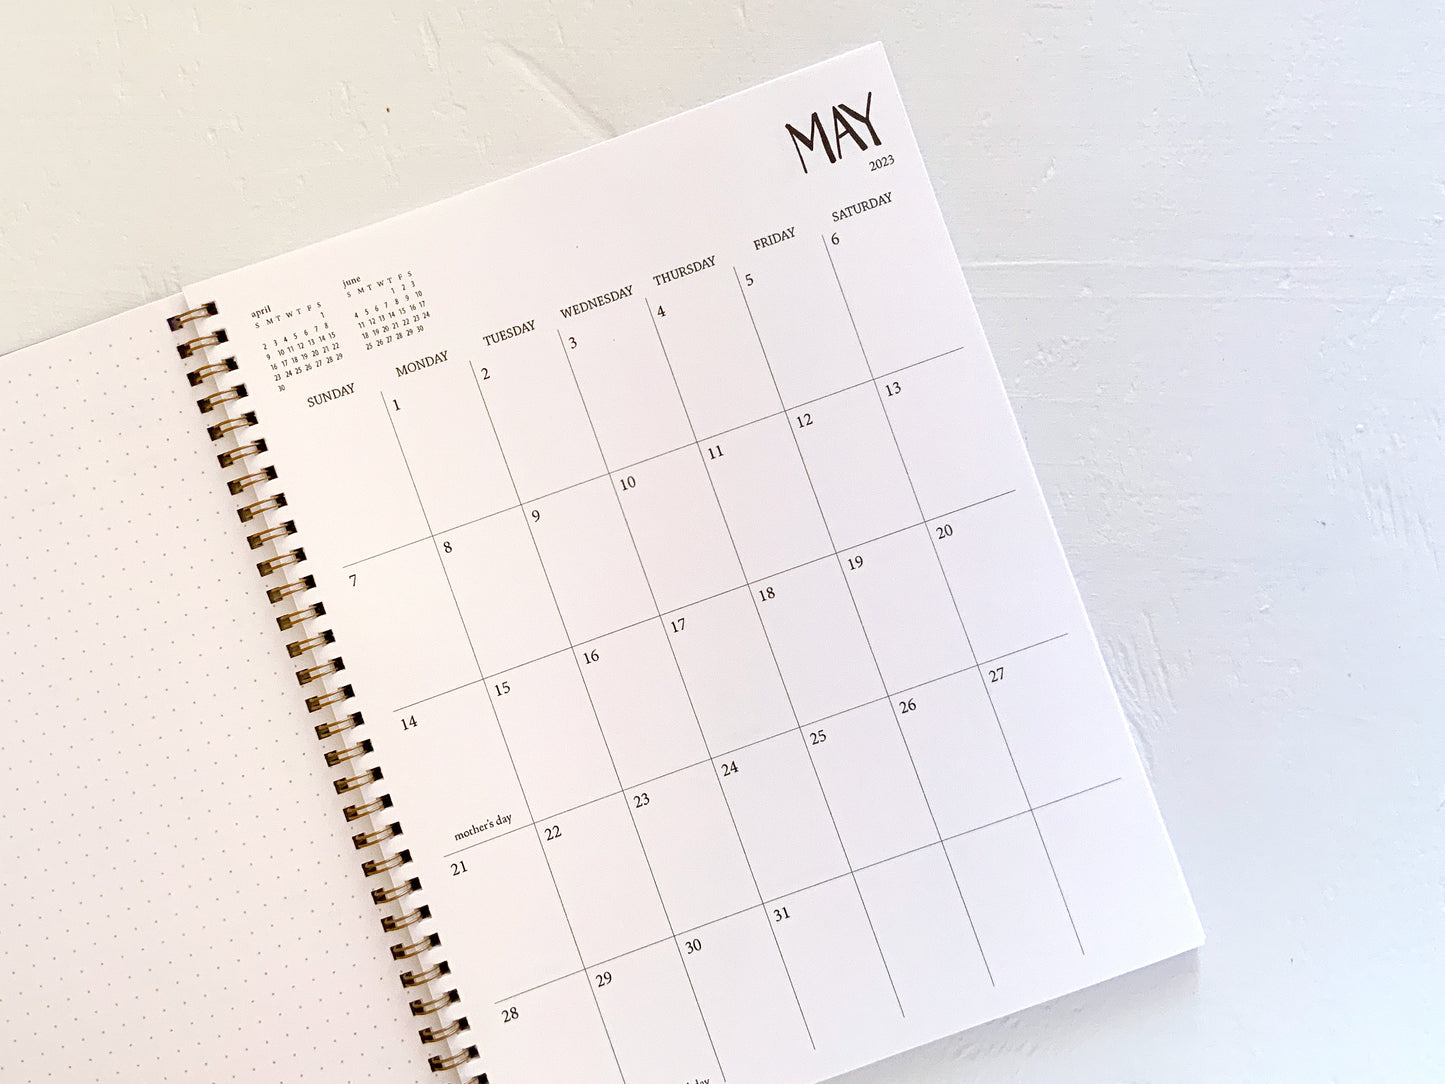 2 year large monthly spiral planner - start any month | 1 page per month